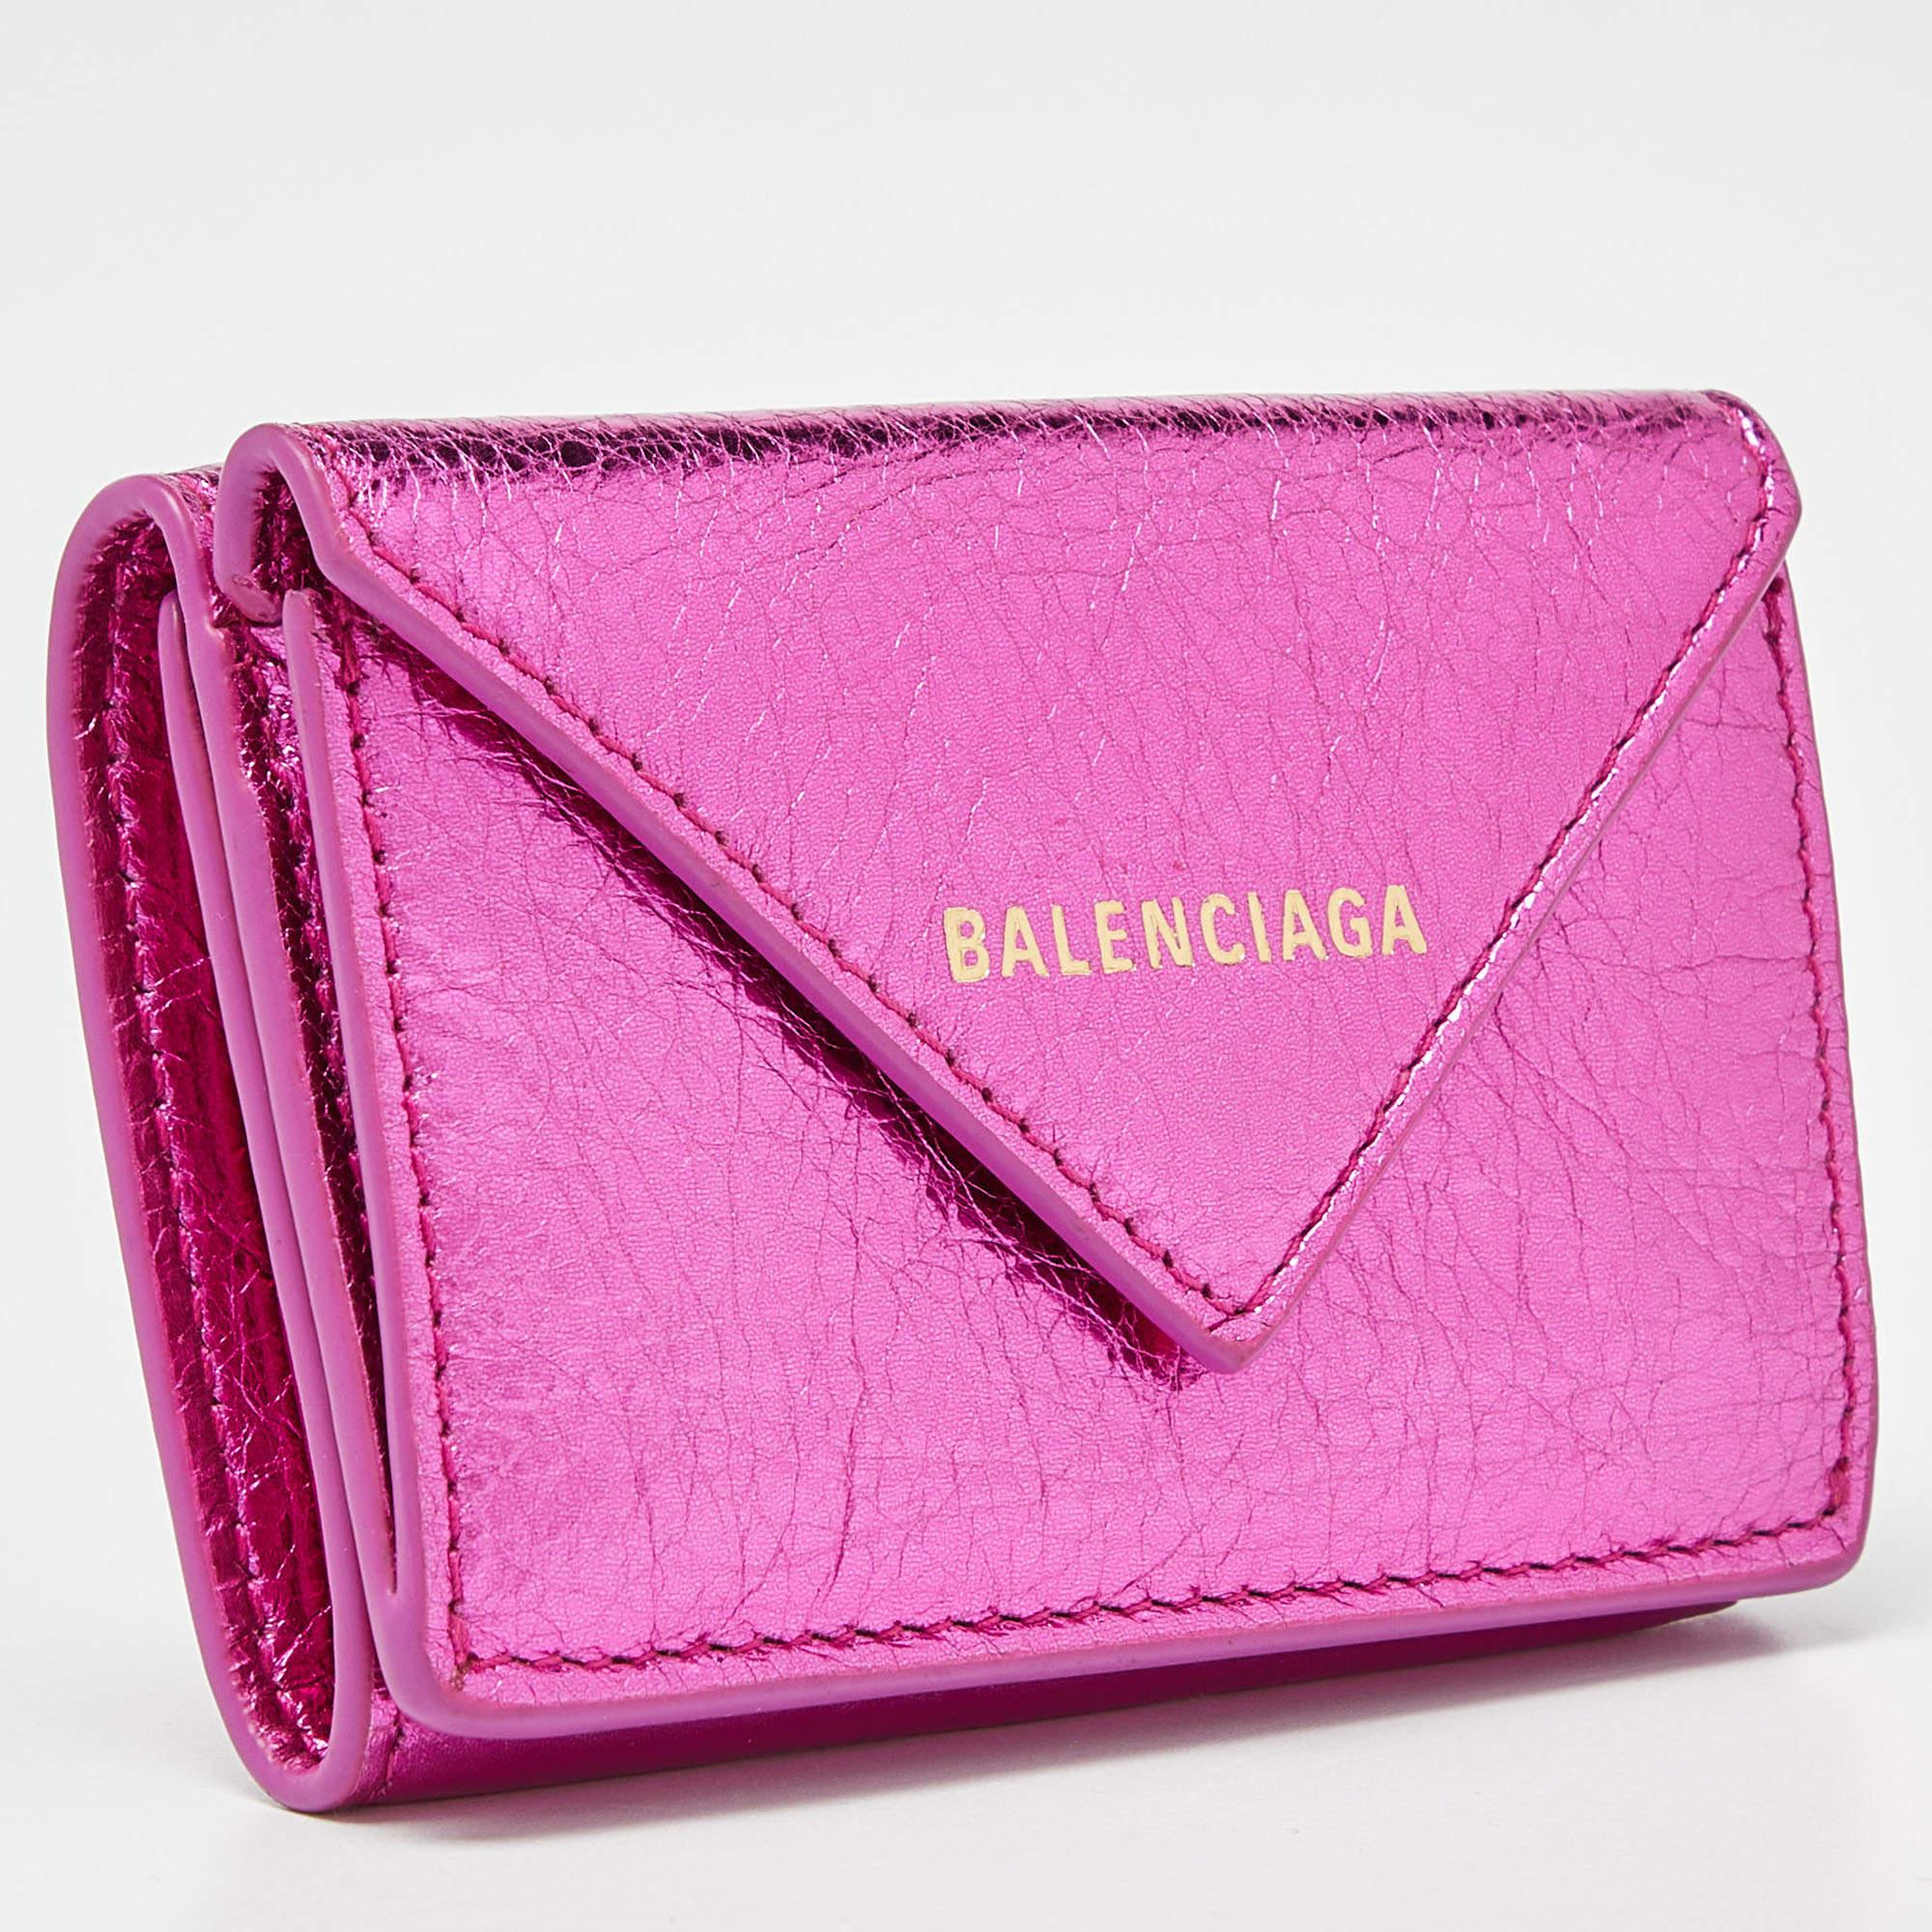 This Balenciaga wallet is an immaculate balance of sophistication and rational utility. It has been designed using prime quality materials and elevated by a sleek finish. The creation is equipped with ample space for your monetary essentials.

